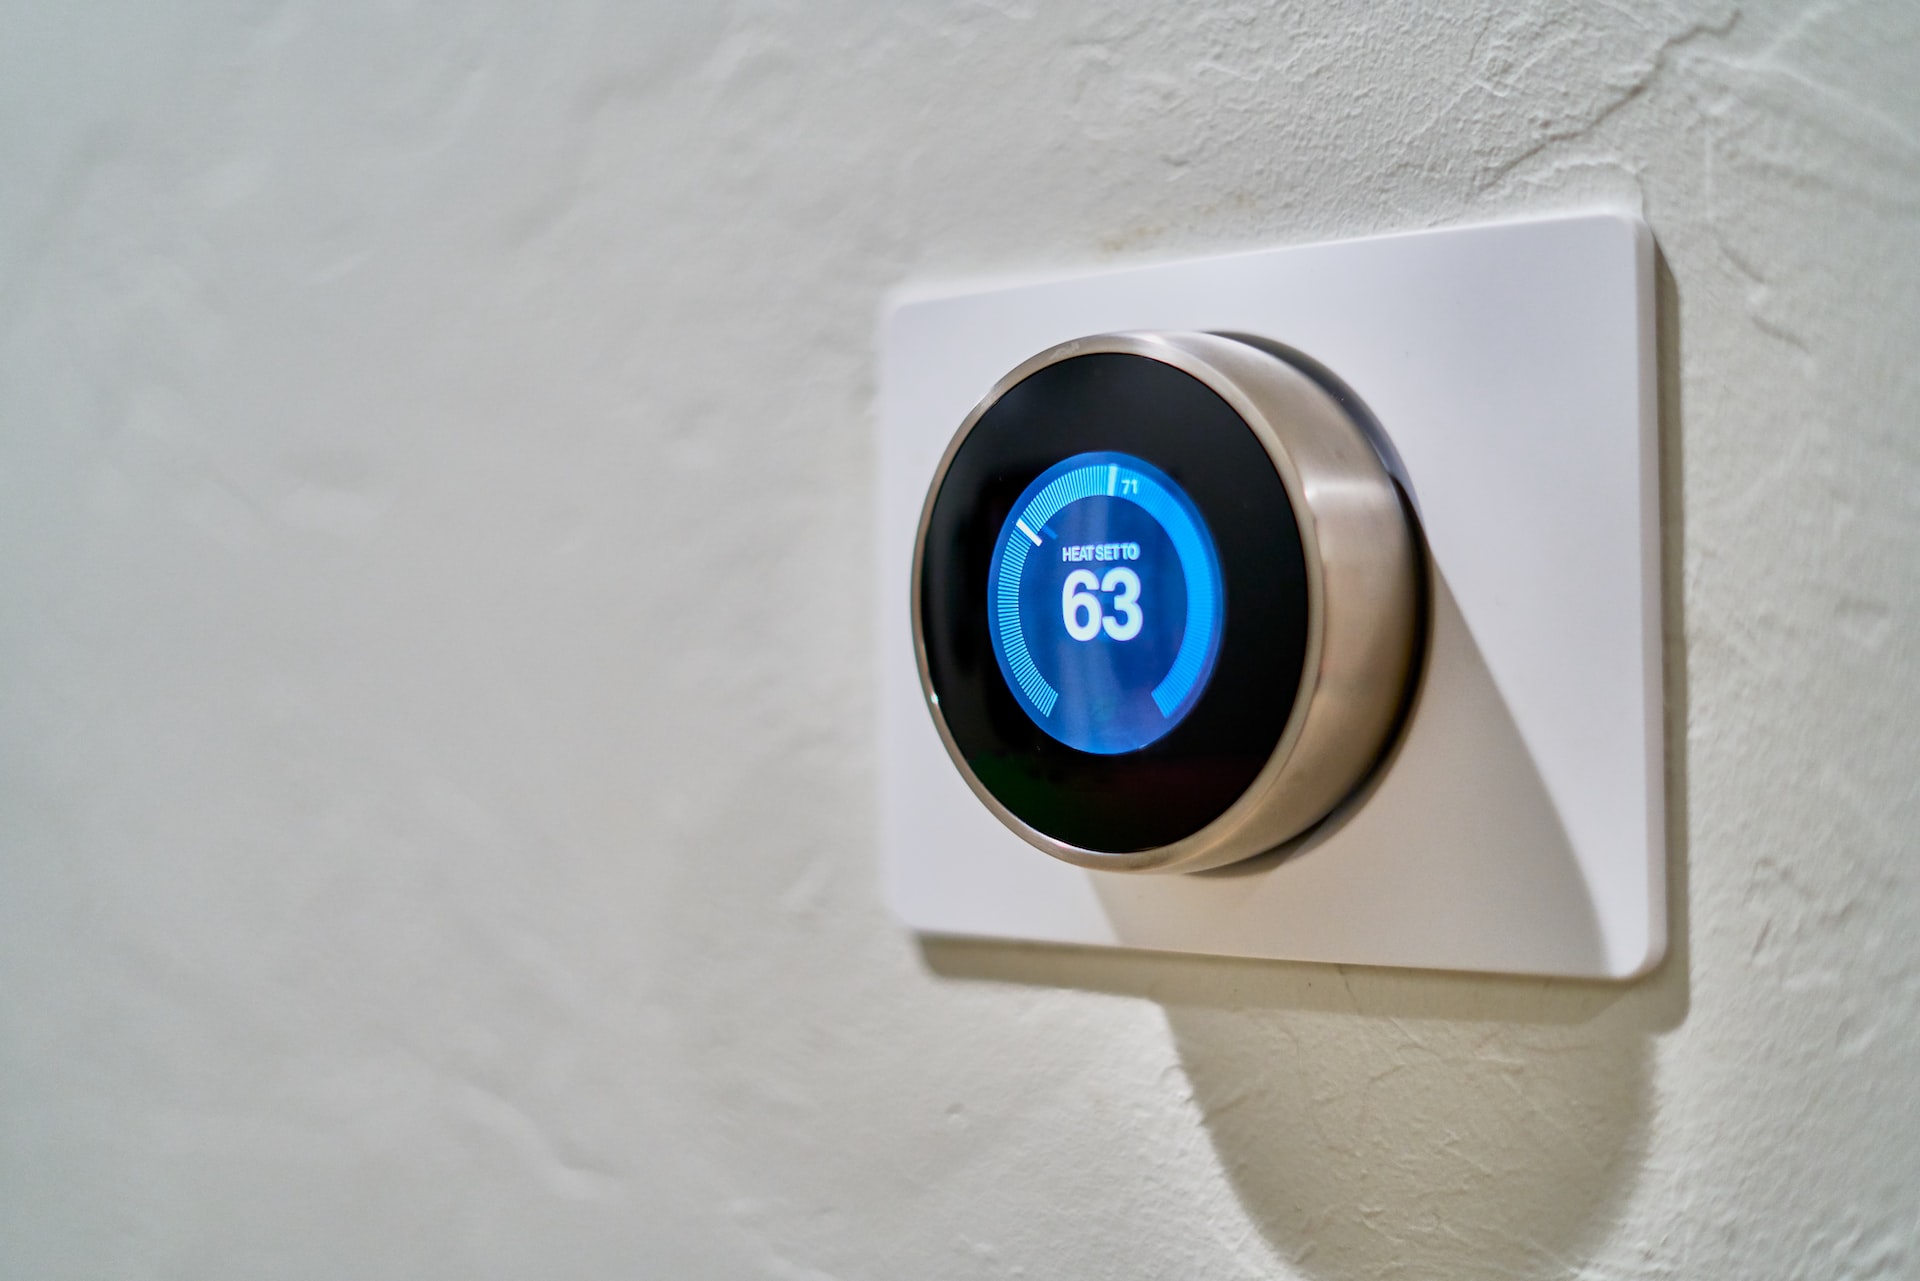 digital thermostat to turn on air conditioning